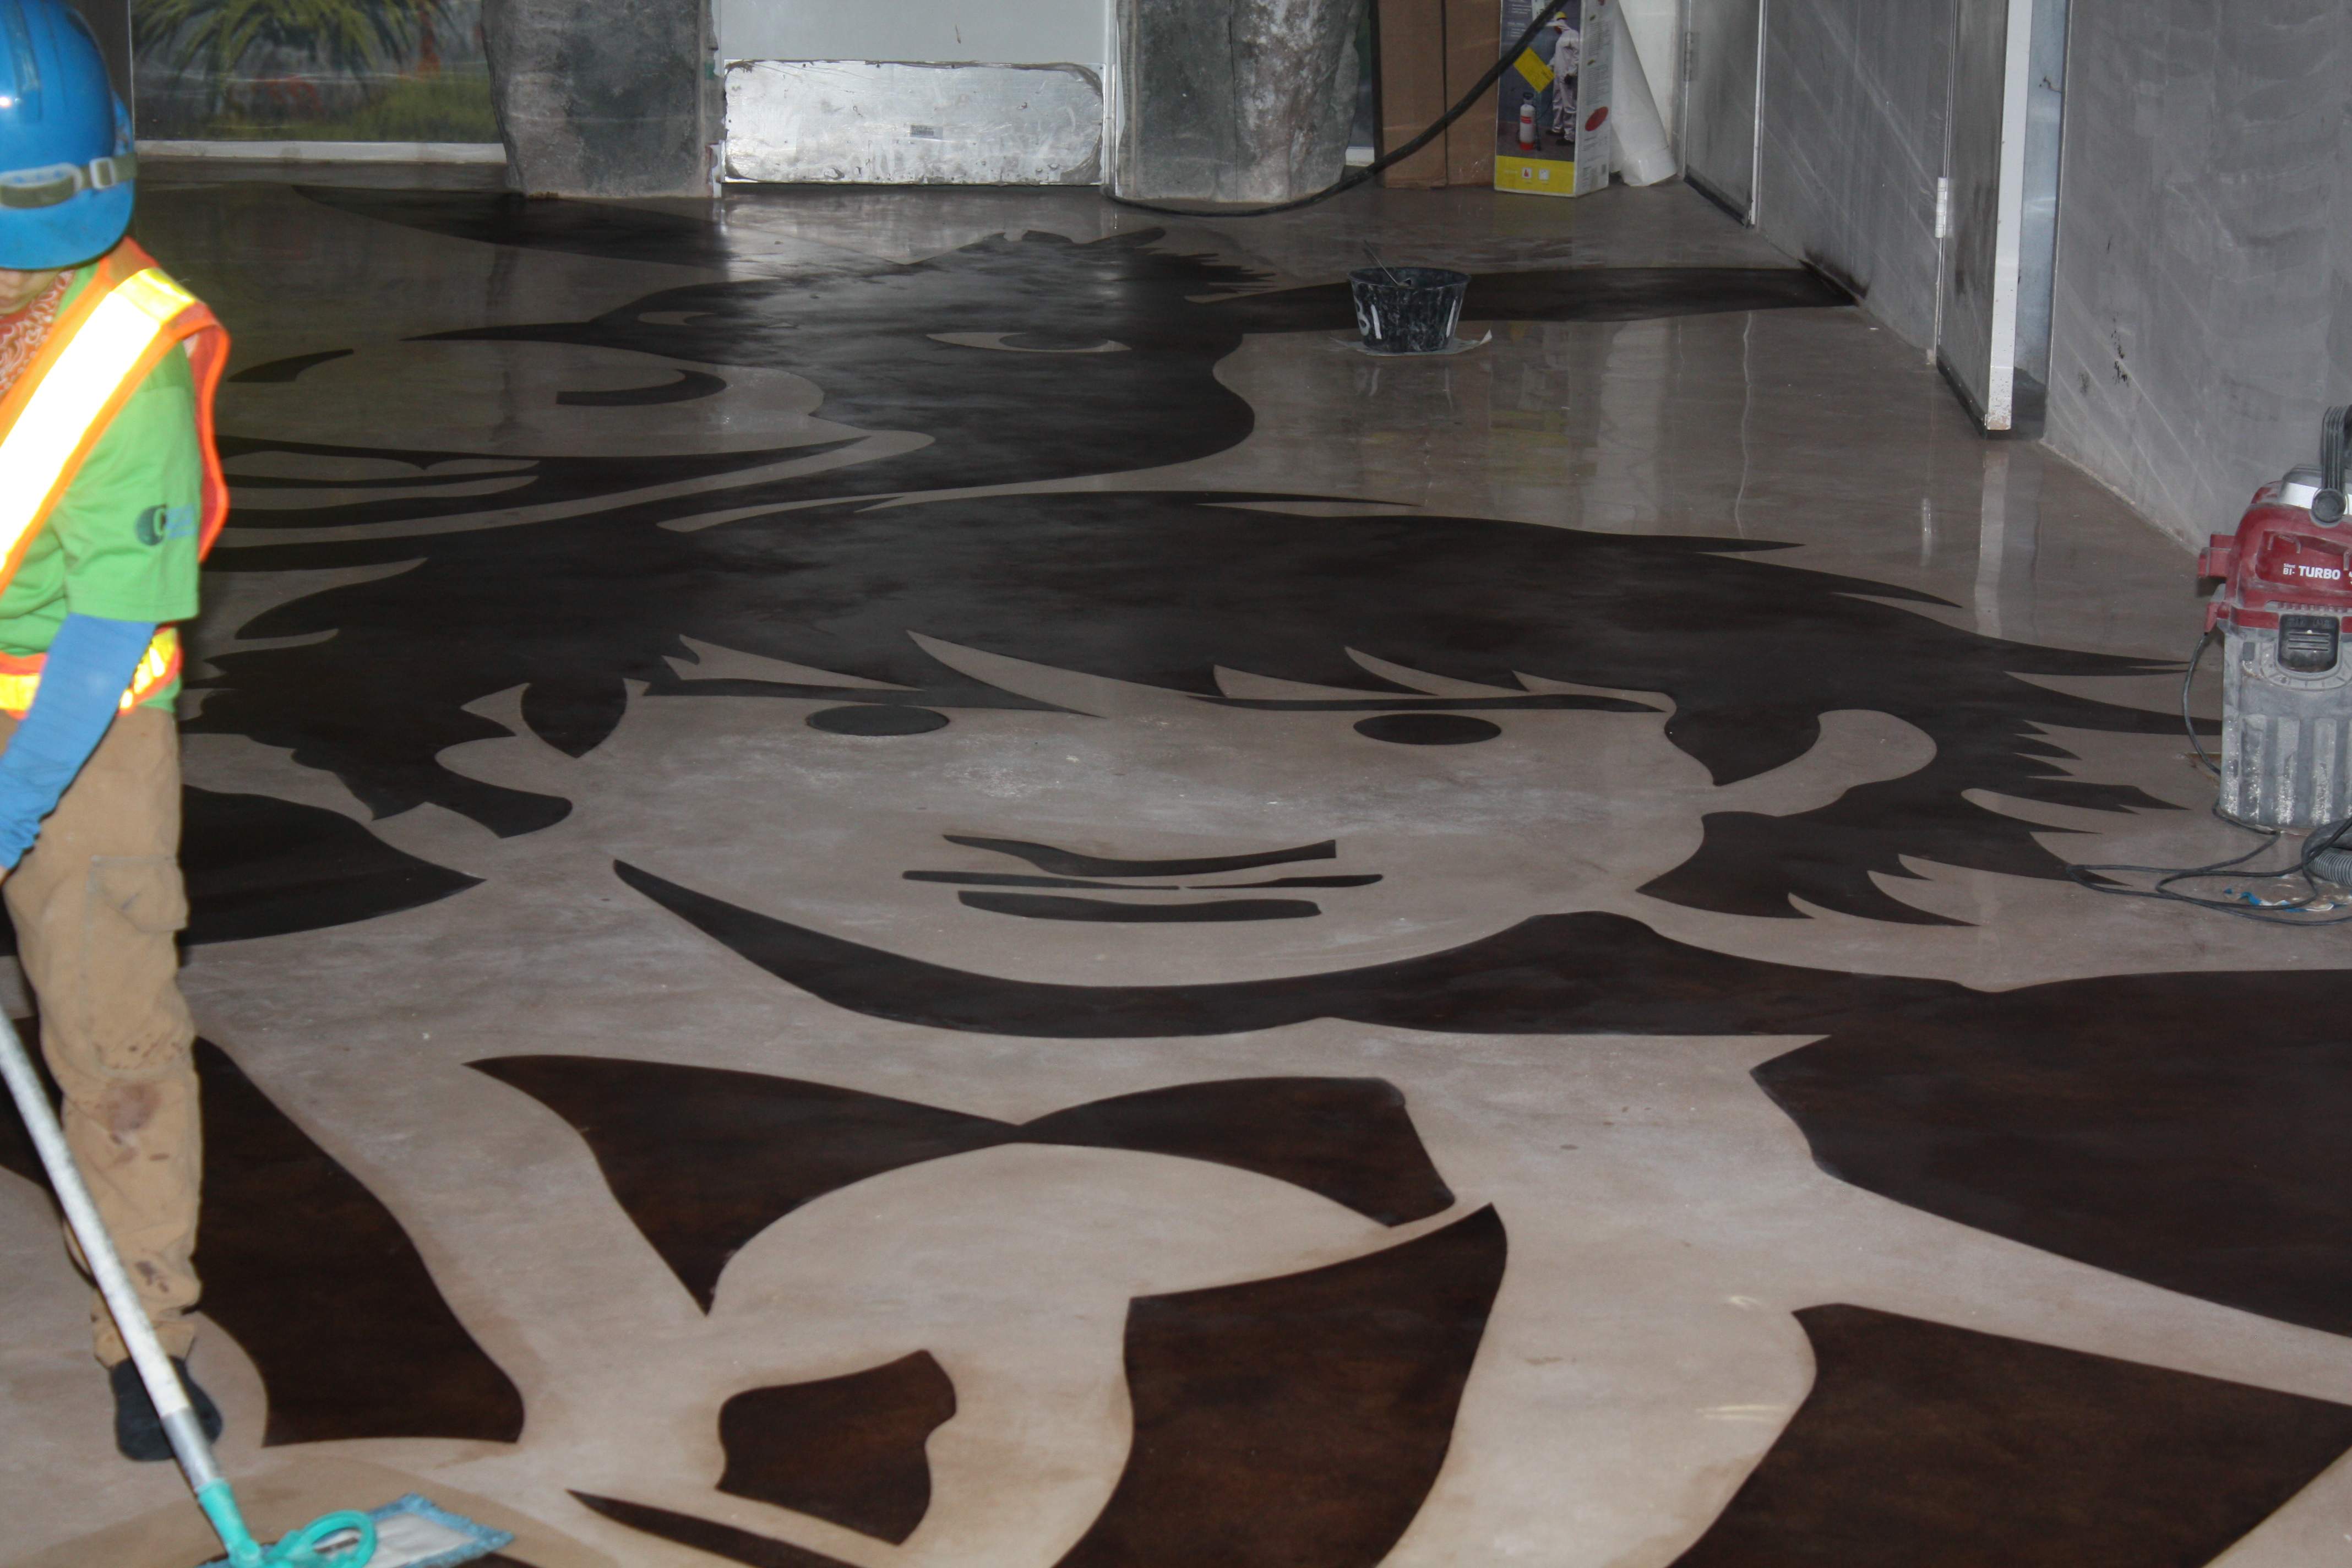 Installed decorative self -leveling material, installed stencil art work, polished.